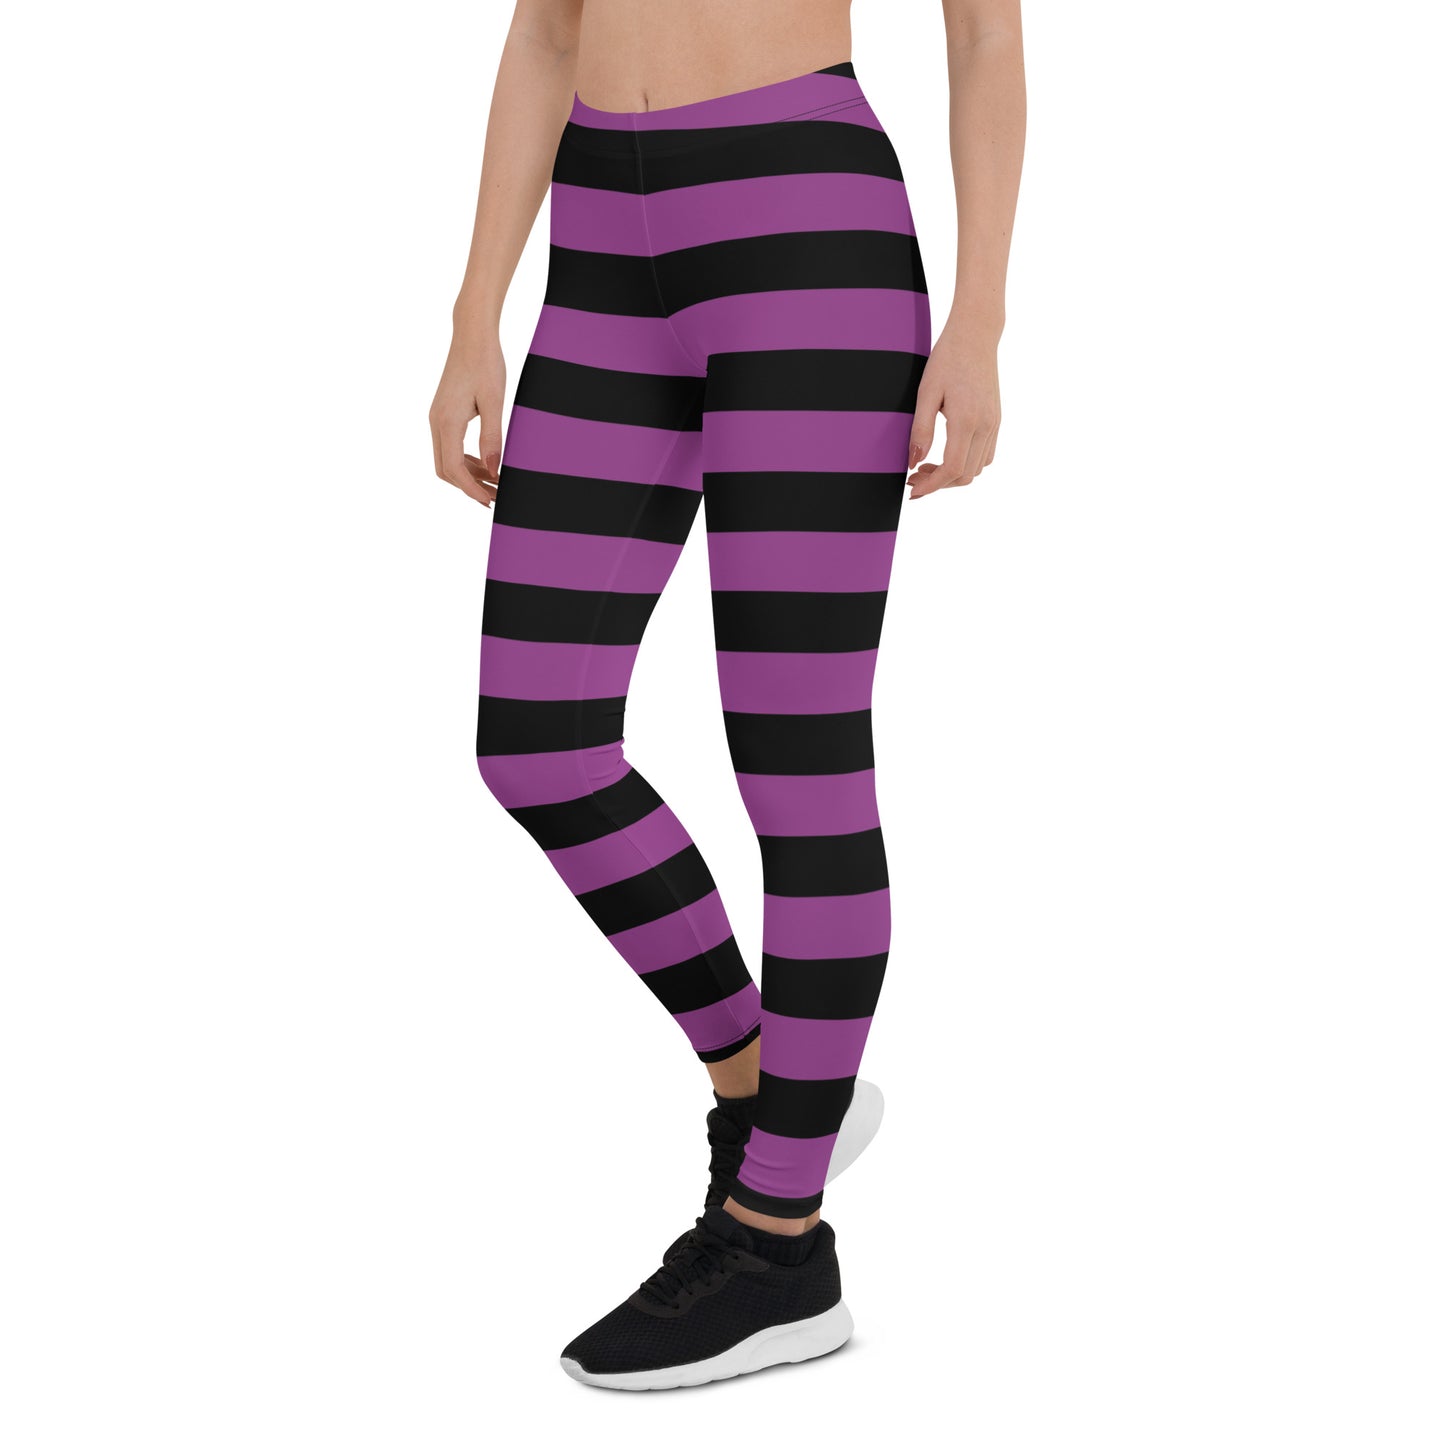 Black Purple Striped Leggings Women, Halloween Witch Goth Printed Yoga Pants Cute Graphic Workout Designer Tights Gift Starcove Fashion